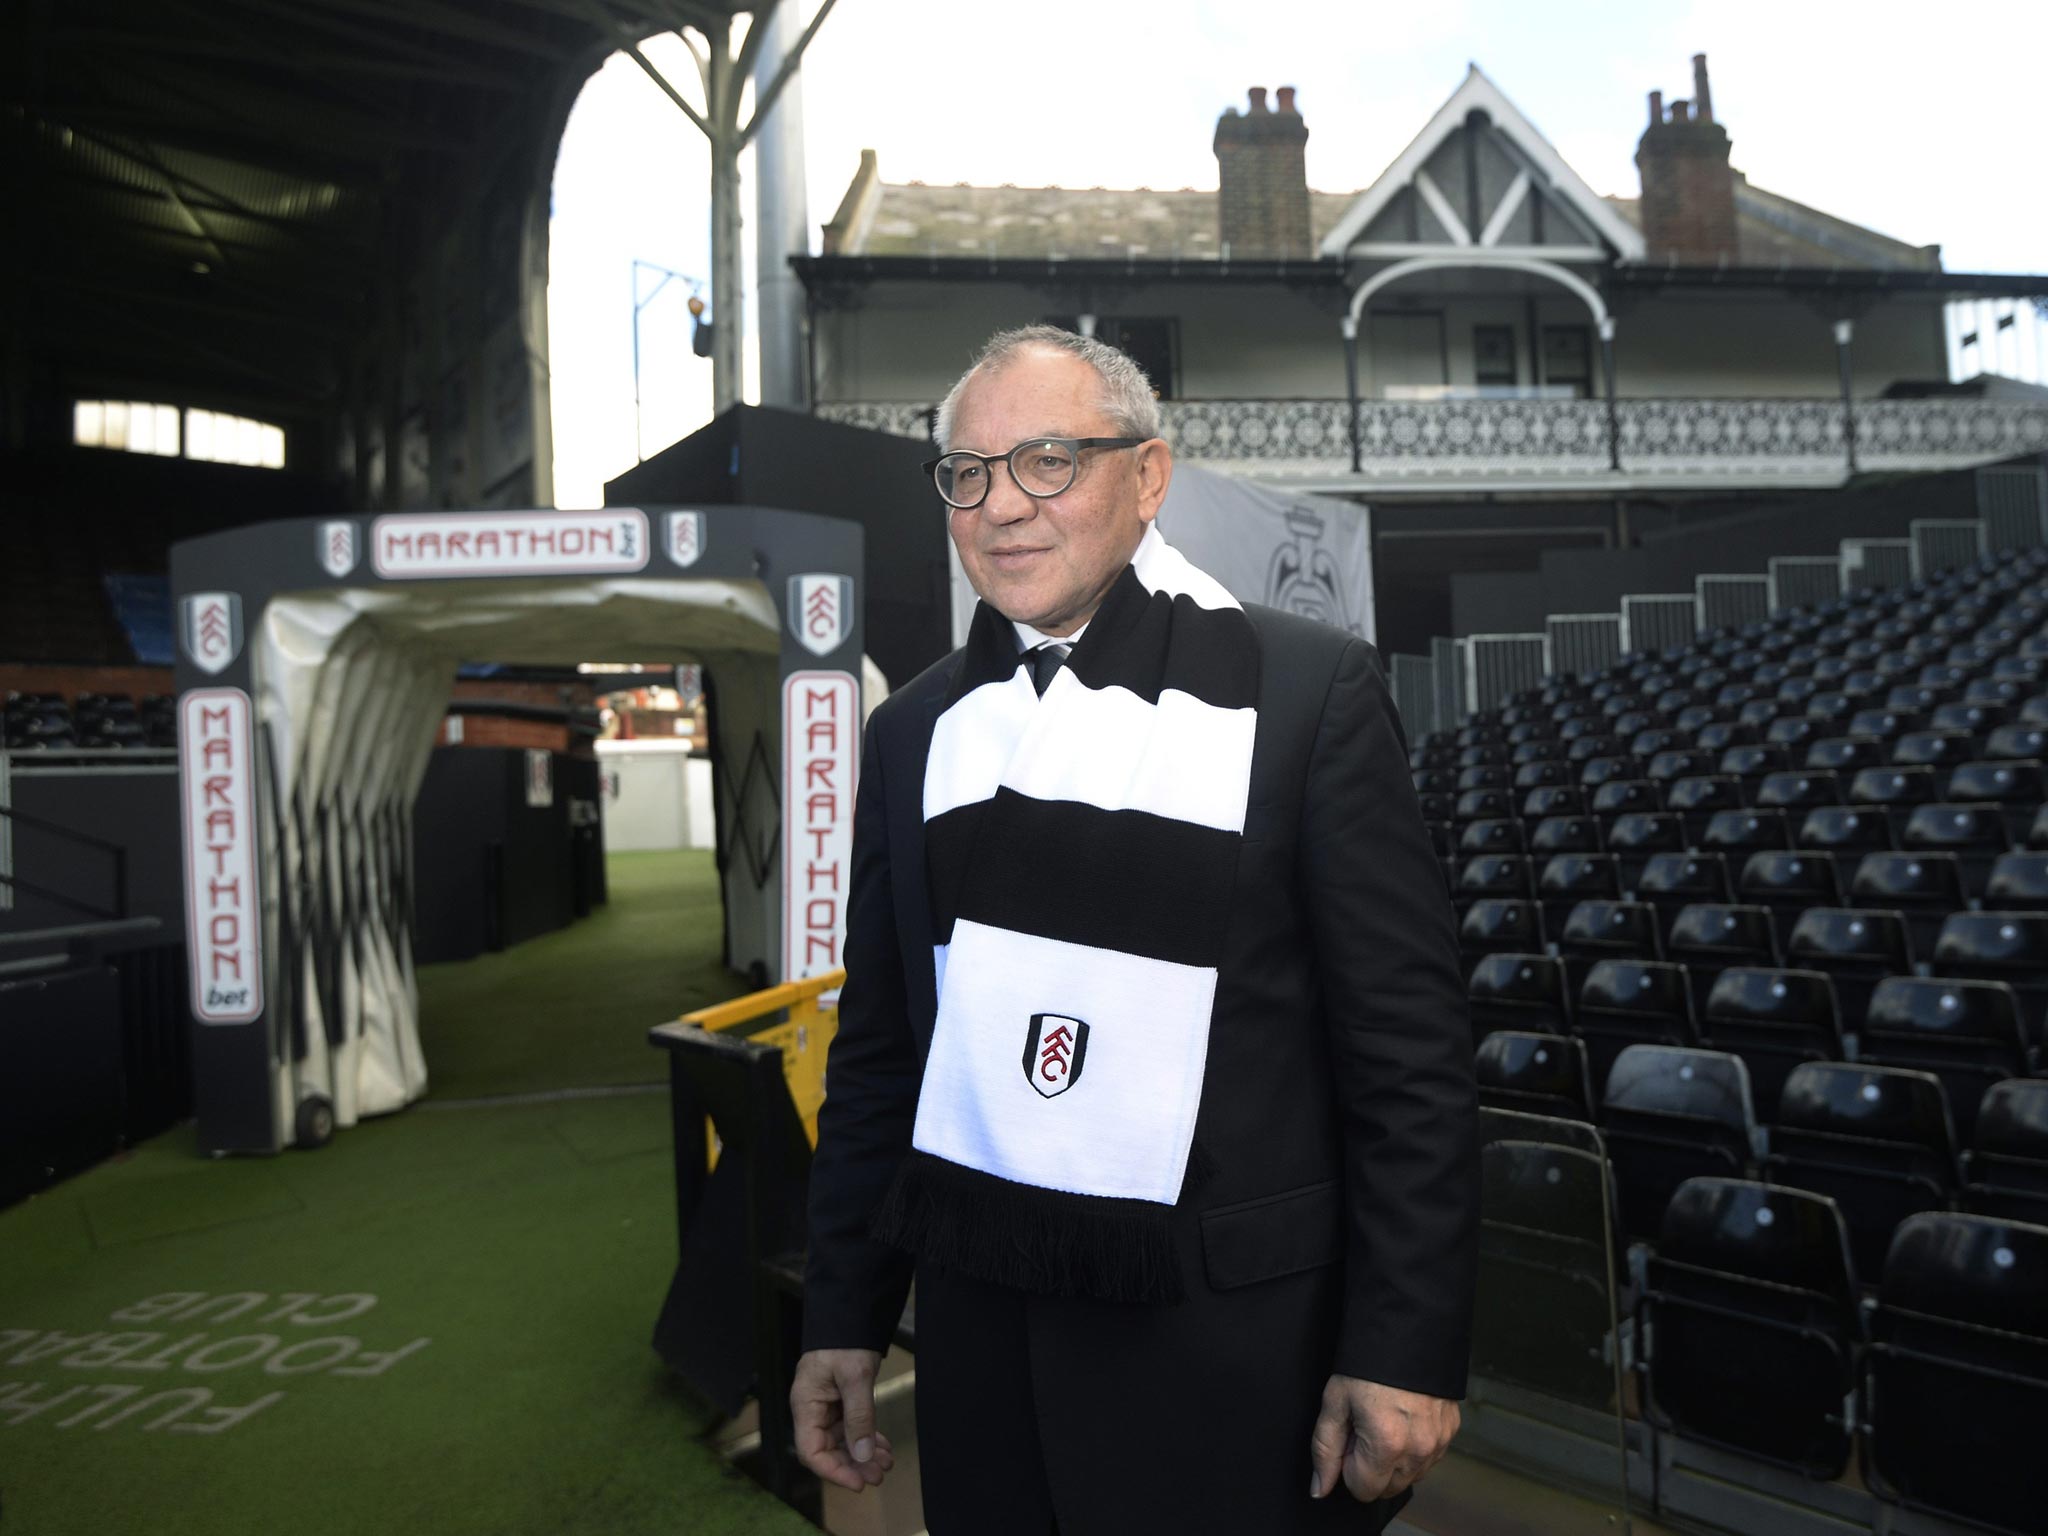 New Fulham manager Felix Magath has wasted no time in instituting a tougher training regime ahead of today’s six-pointer with West Bromwich Albion